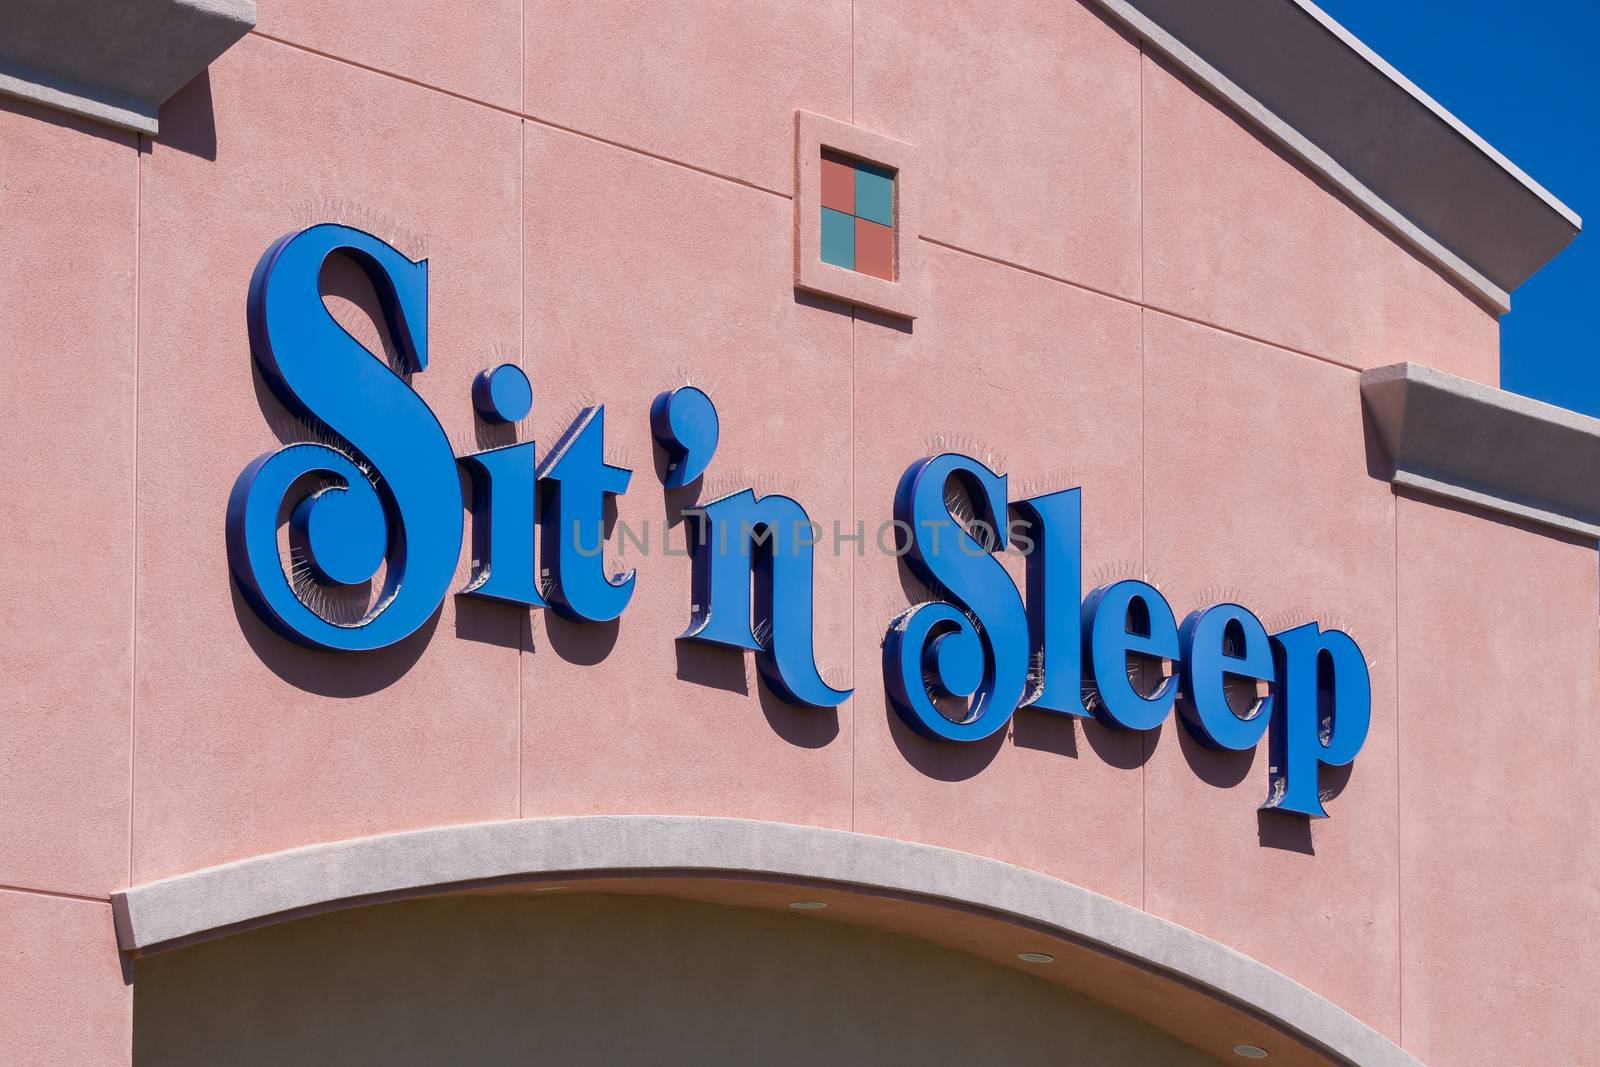 PALMDALE, CA/USA - APRIL 23, 2016: Sit 'n Sleep retail store and sign. Sit 'n Sleep is a major mattress retailer chain in the United States.